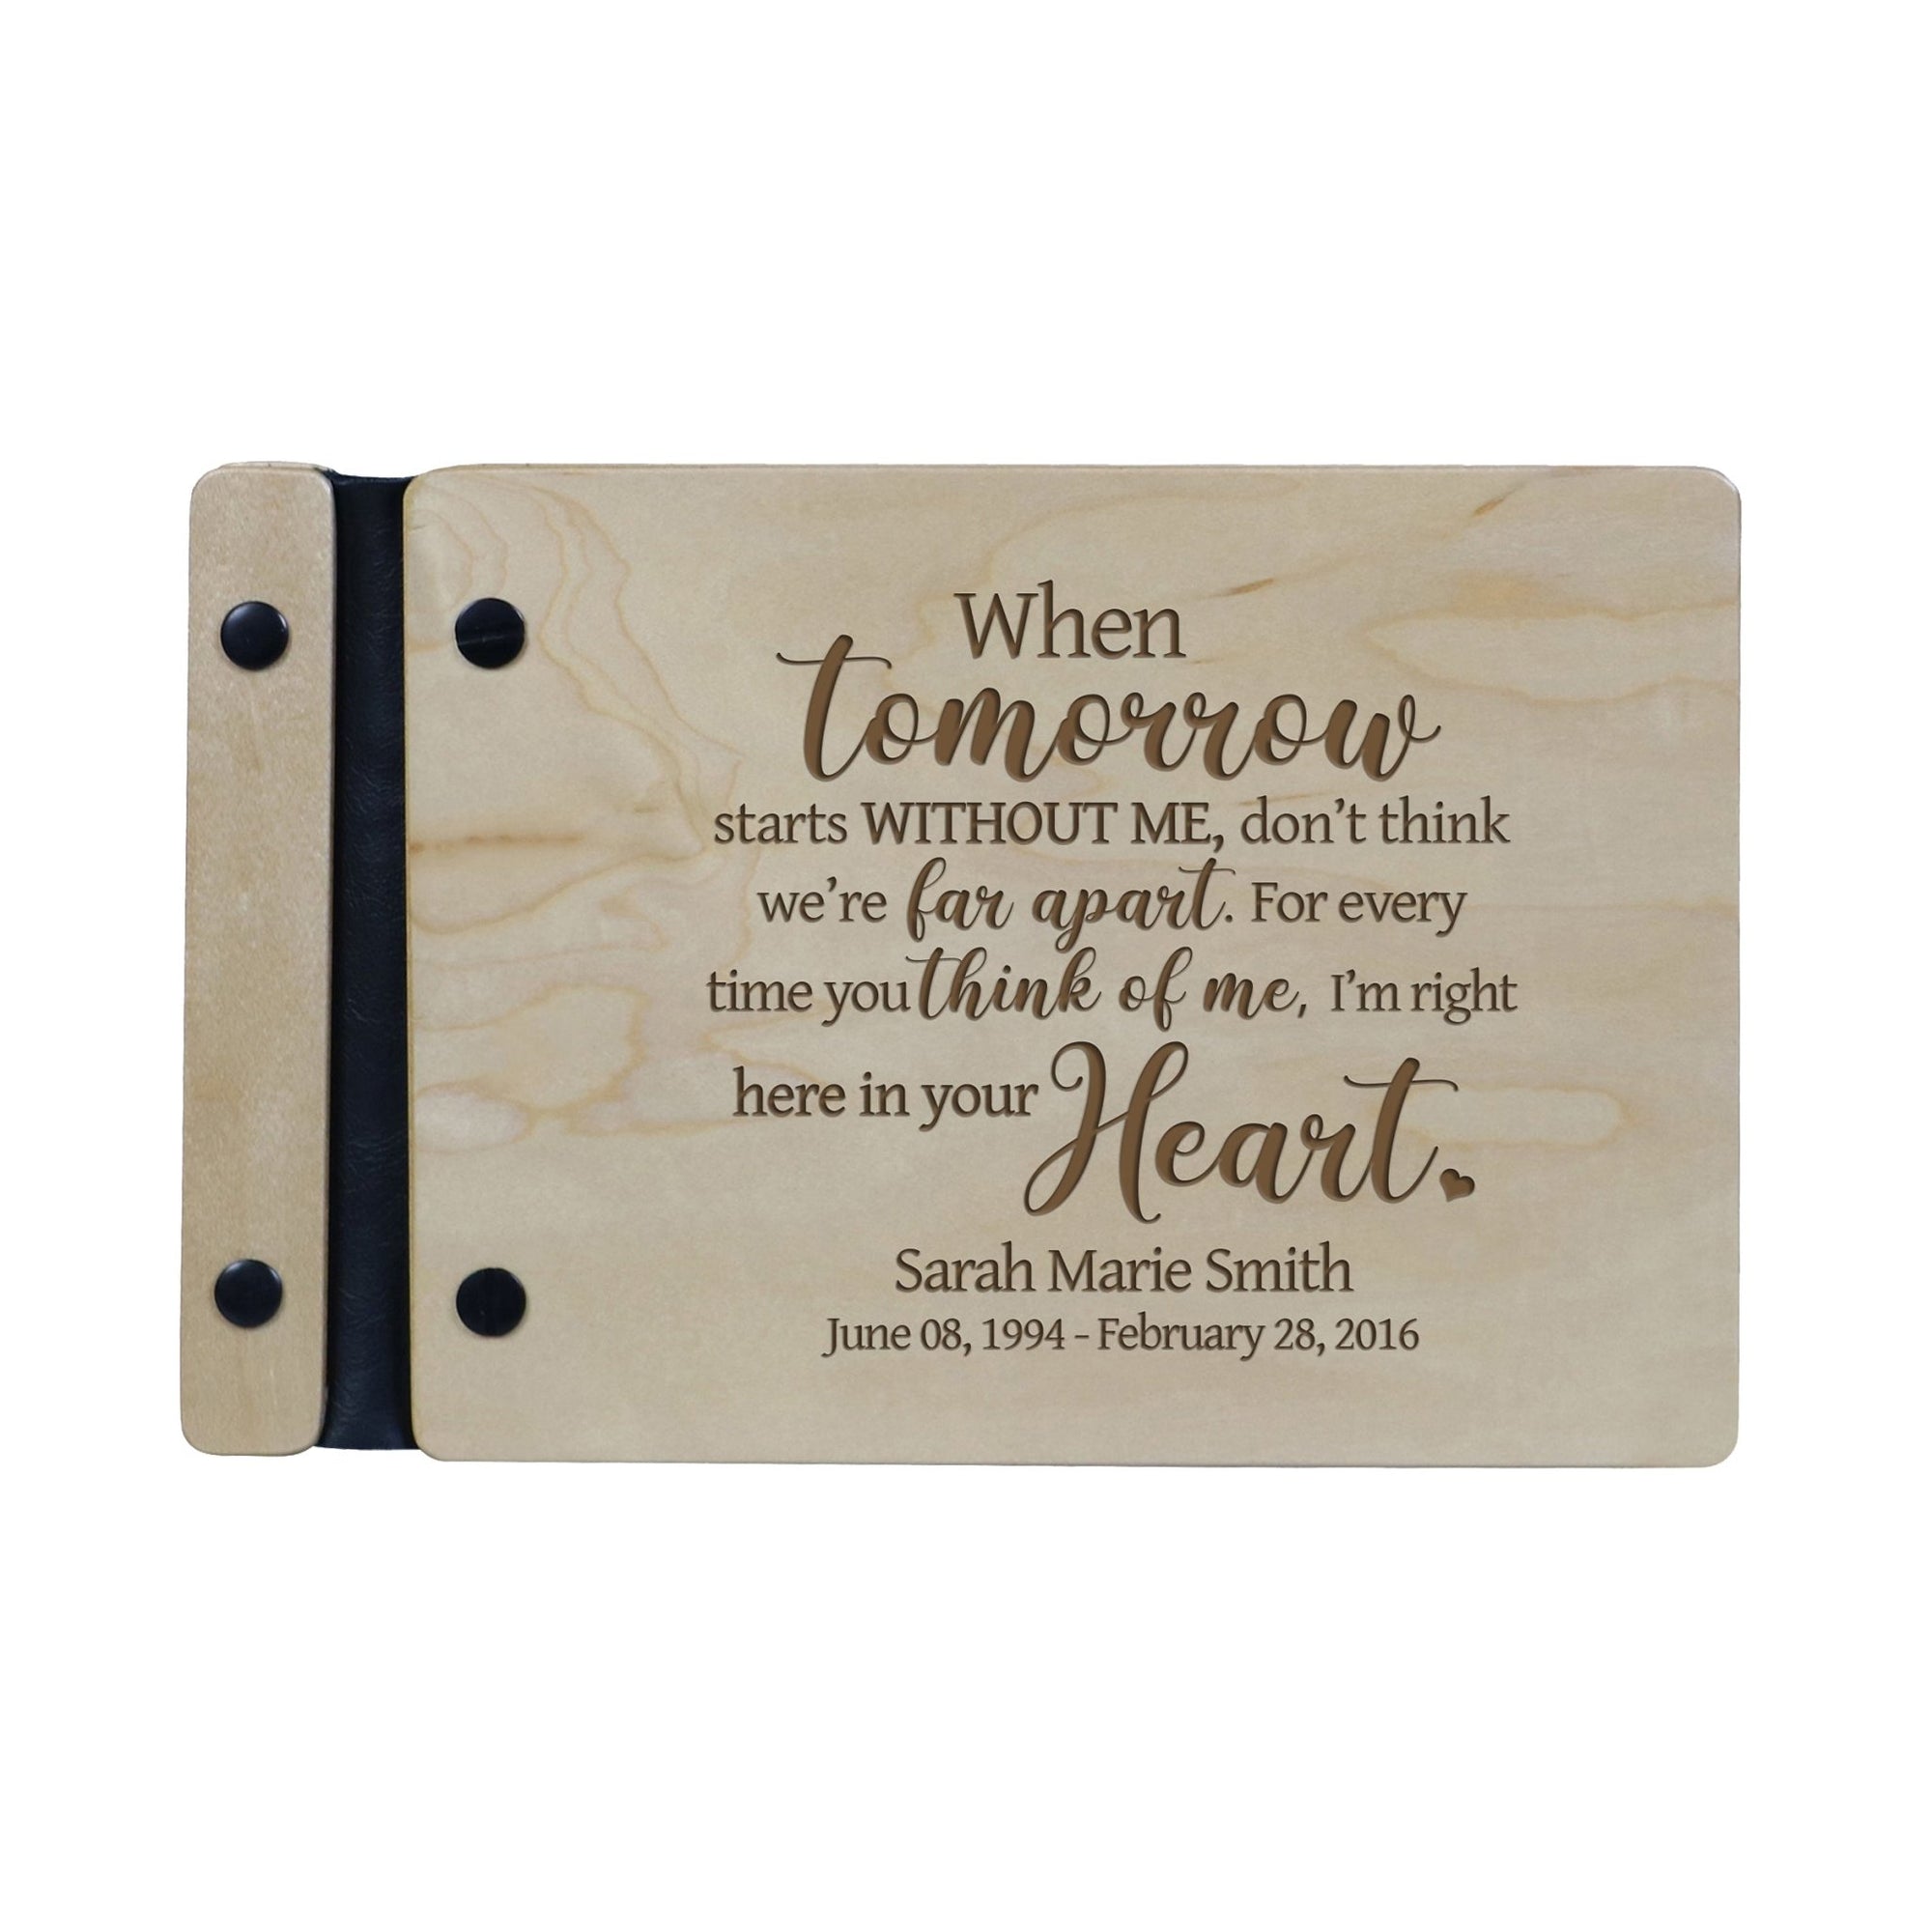 Personalized Wooden Memorial Guestbook 9.375” x 6” x .75" - When Tomorrow Starts - LifeSong Milestones